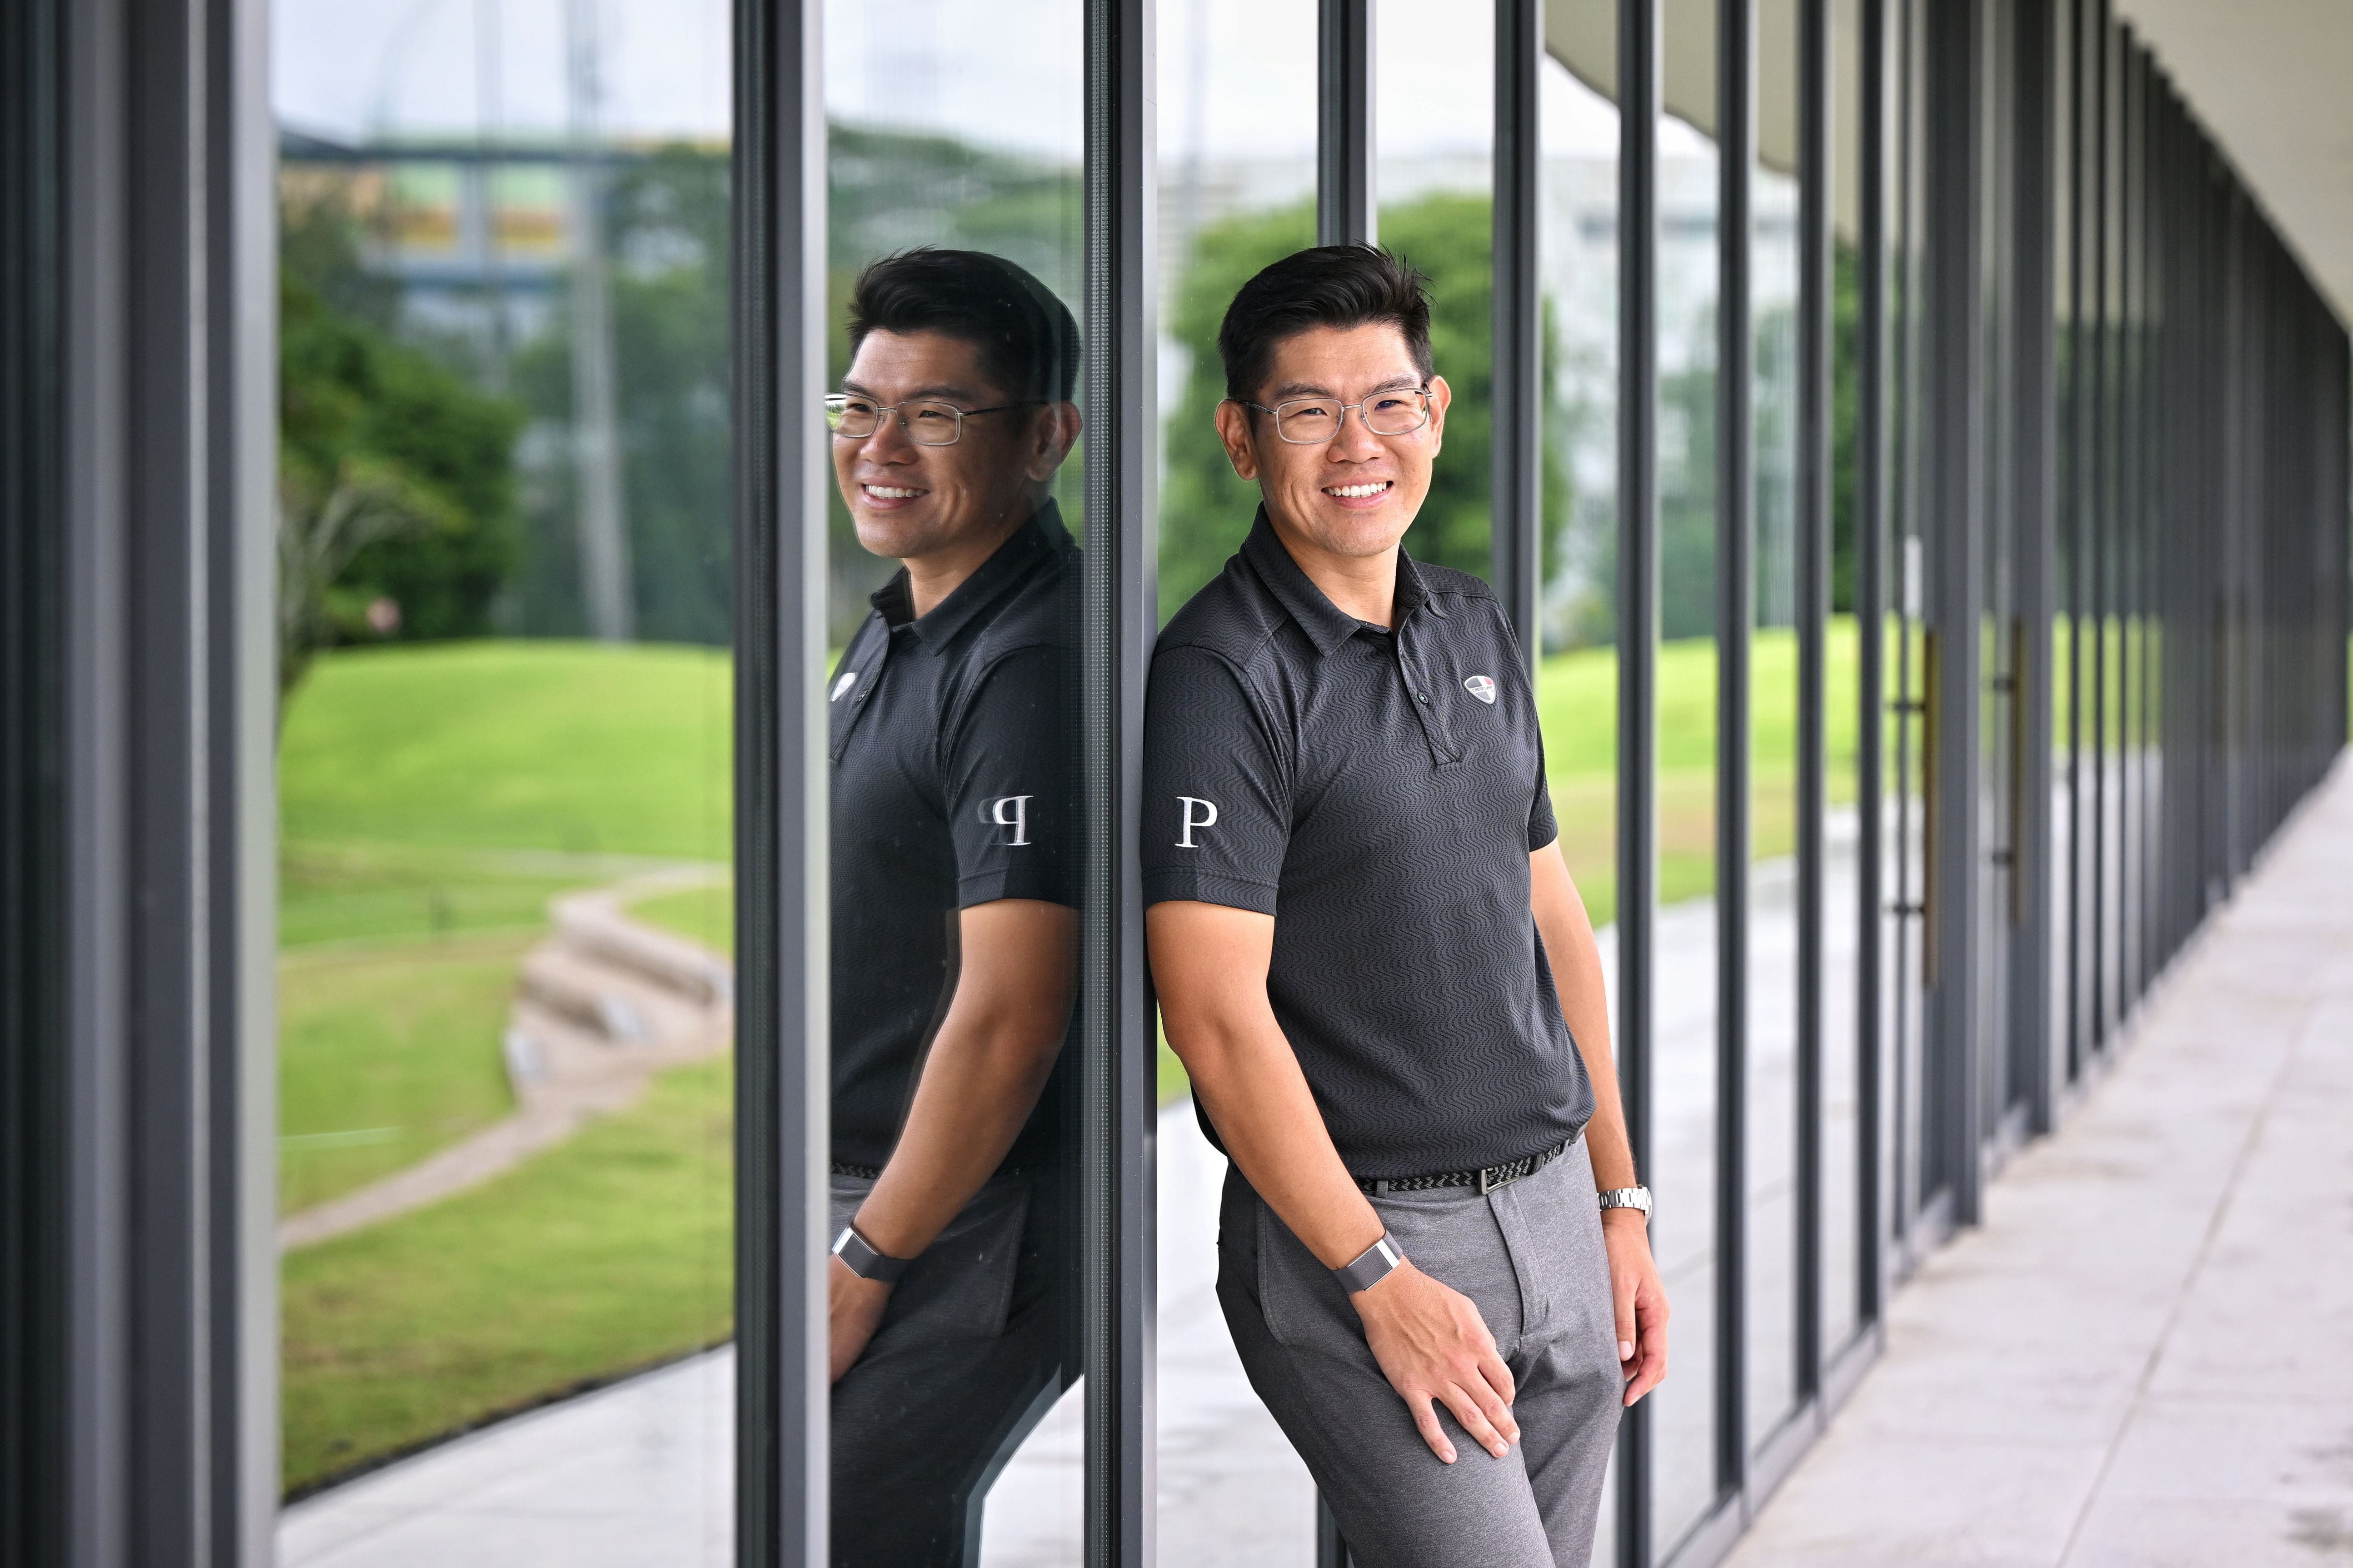 Former Singapore pro golfer Choo Tze Huang steps outside the ropes for post-playing career